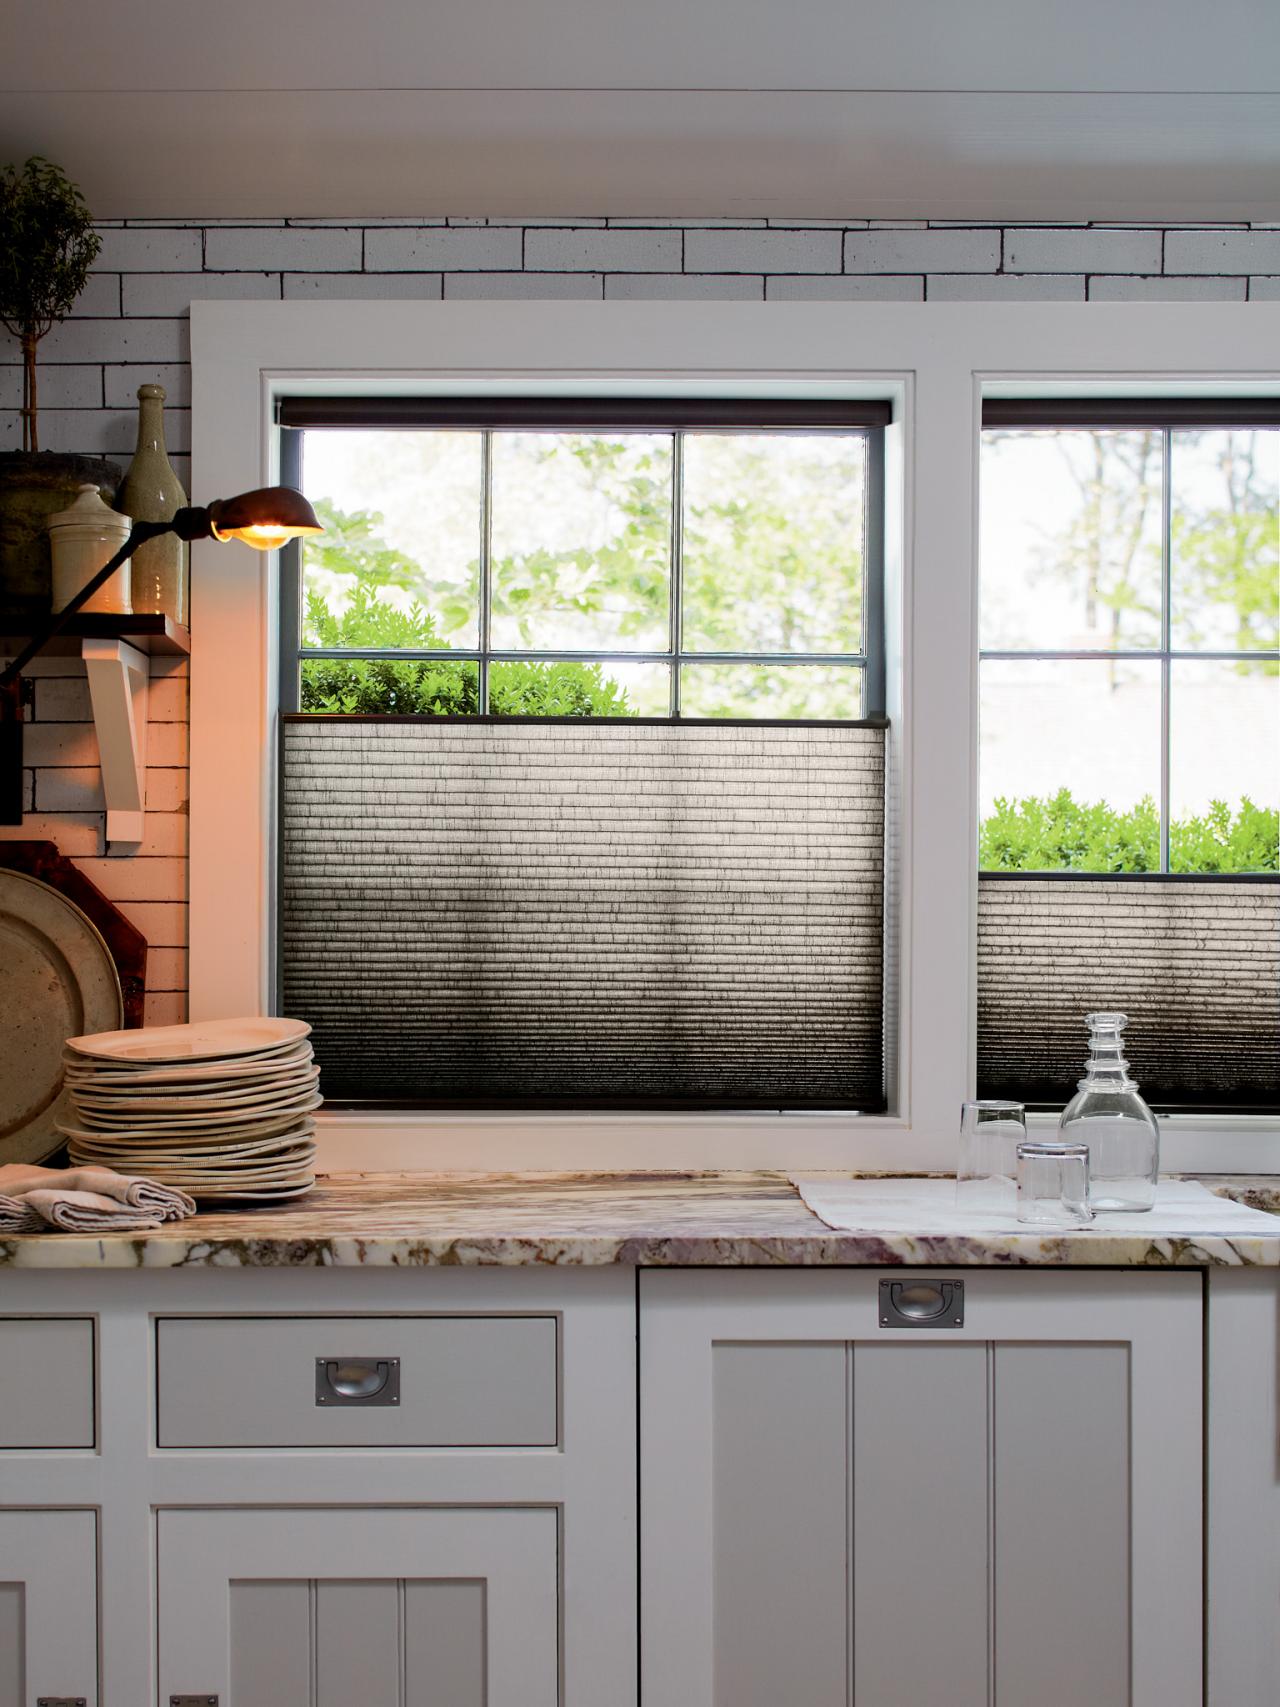 Eclectic Window Treatment Ideas For Kitchens